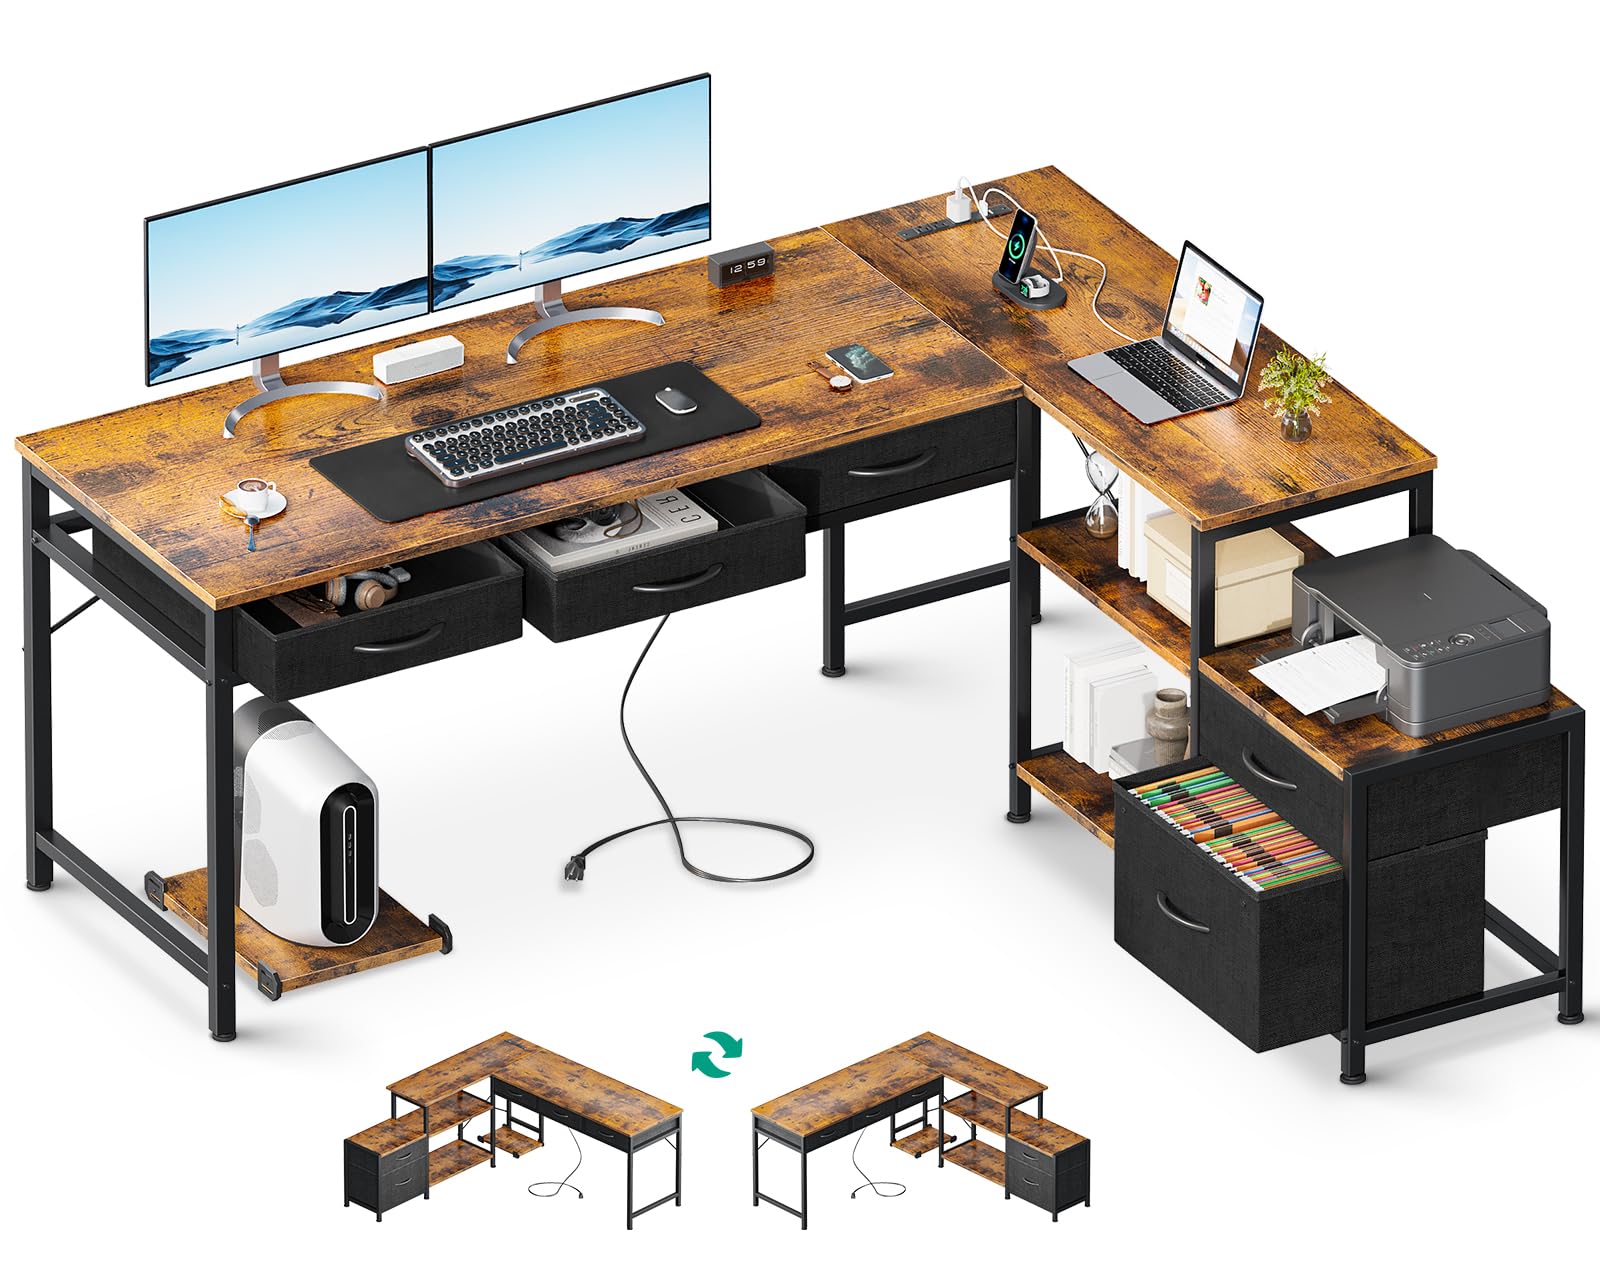 Small Space, Big Ideas: Desks for Compact Spaces